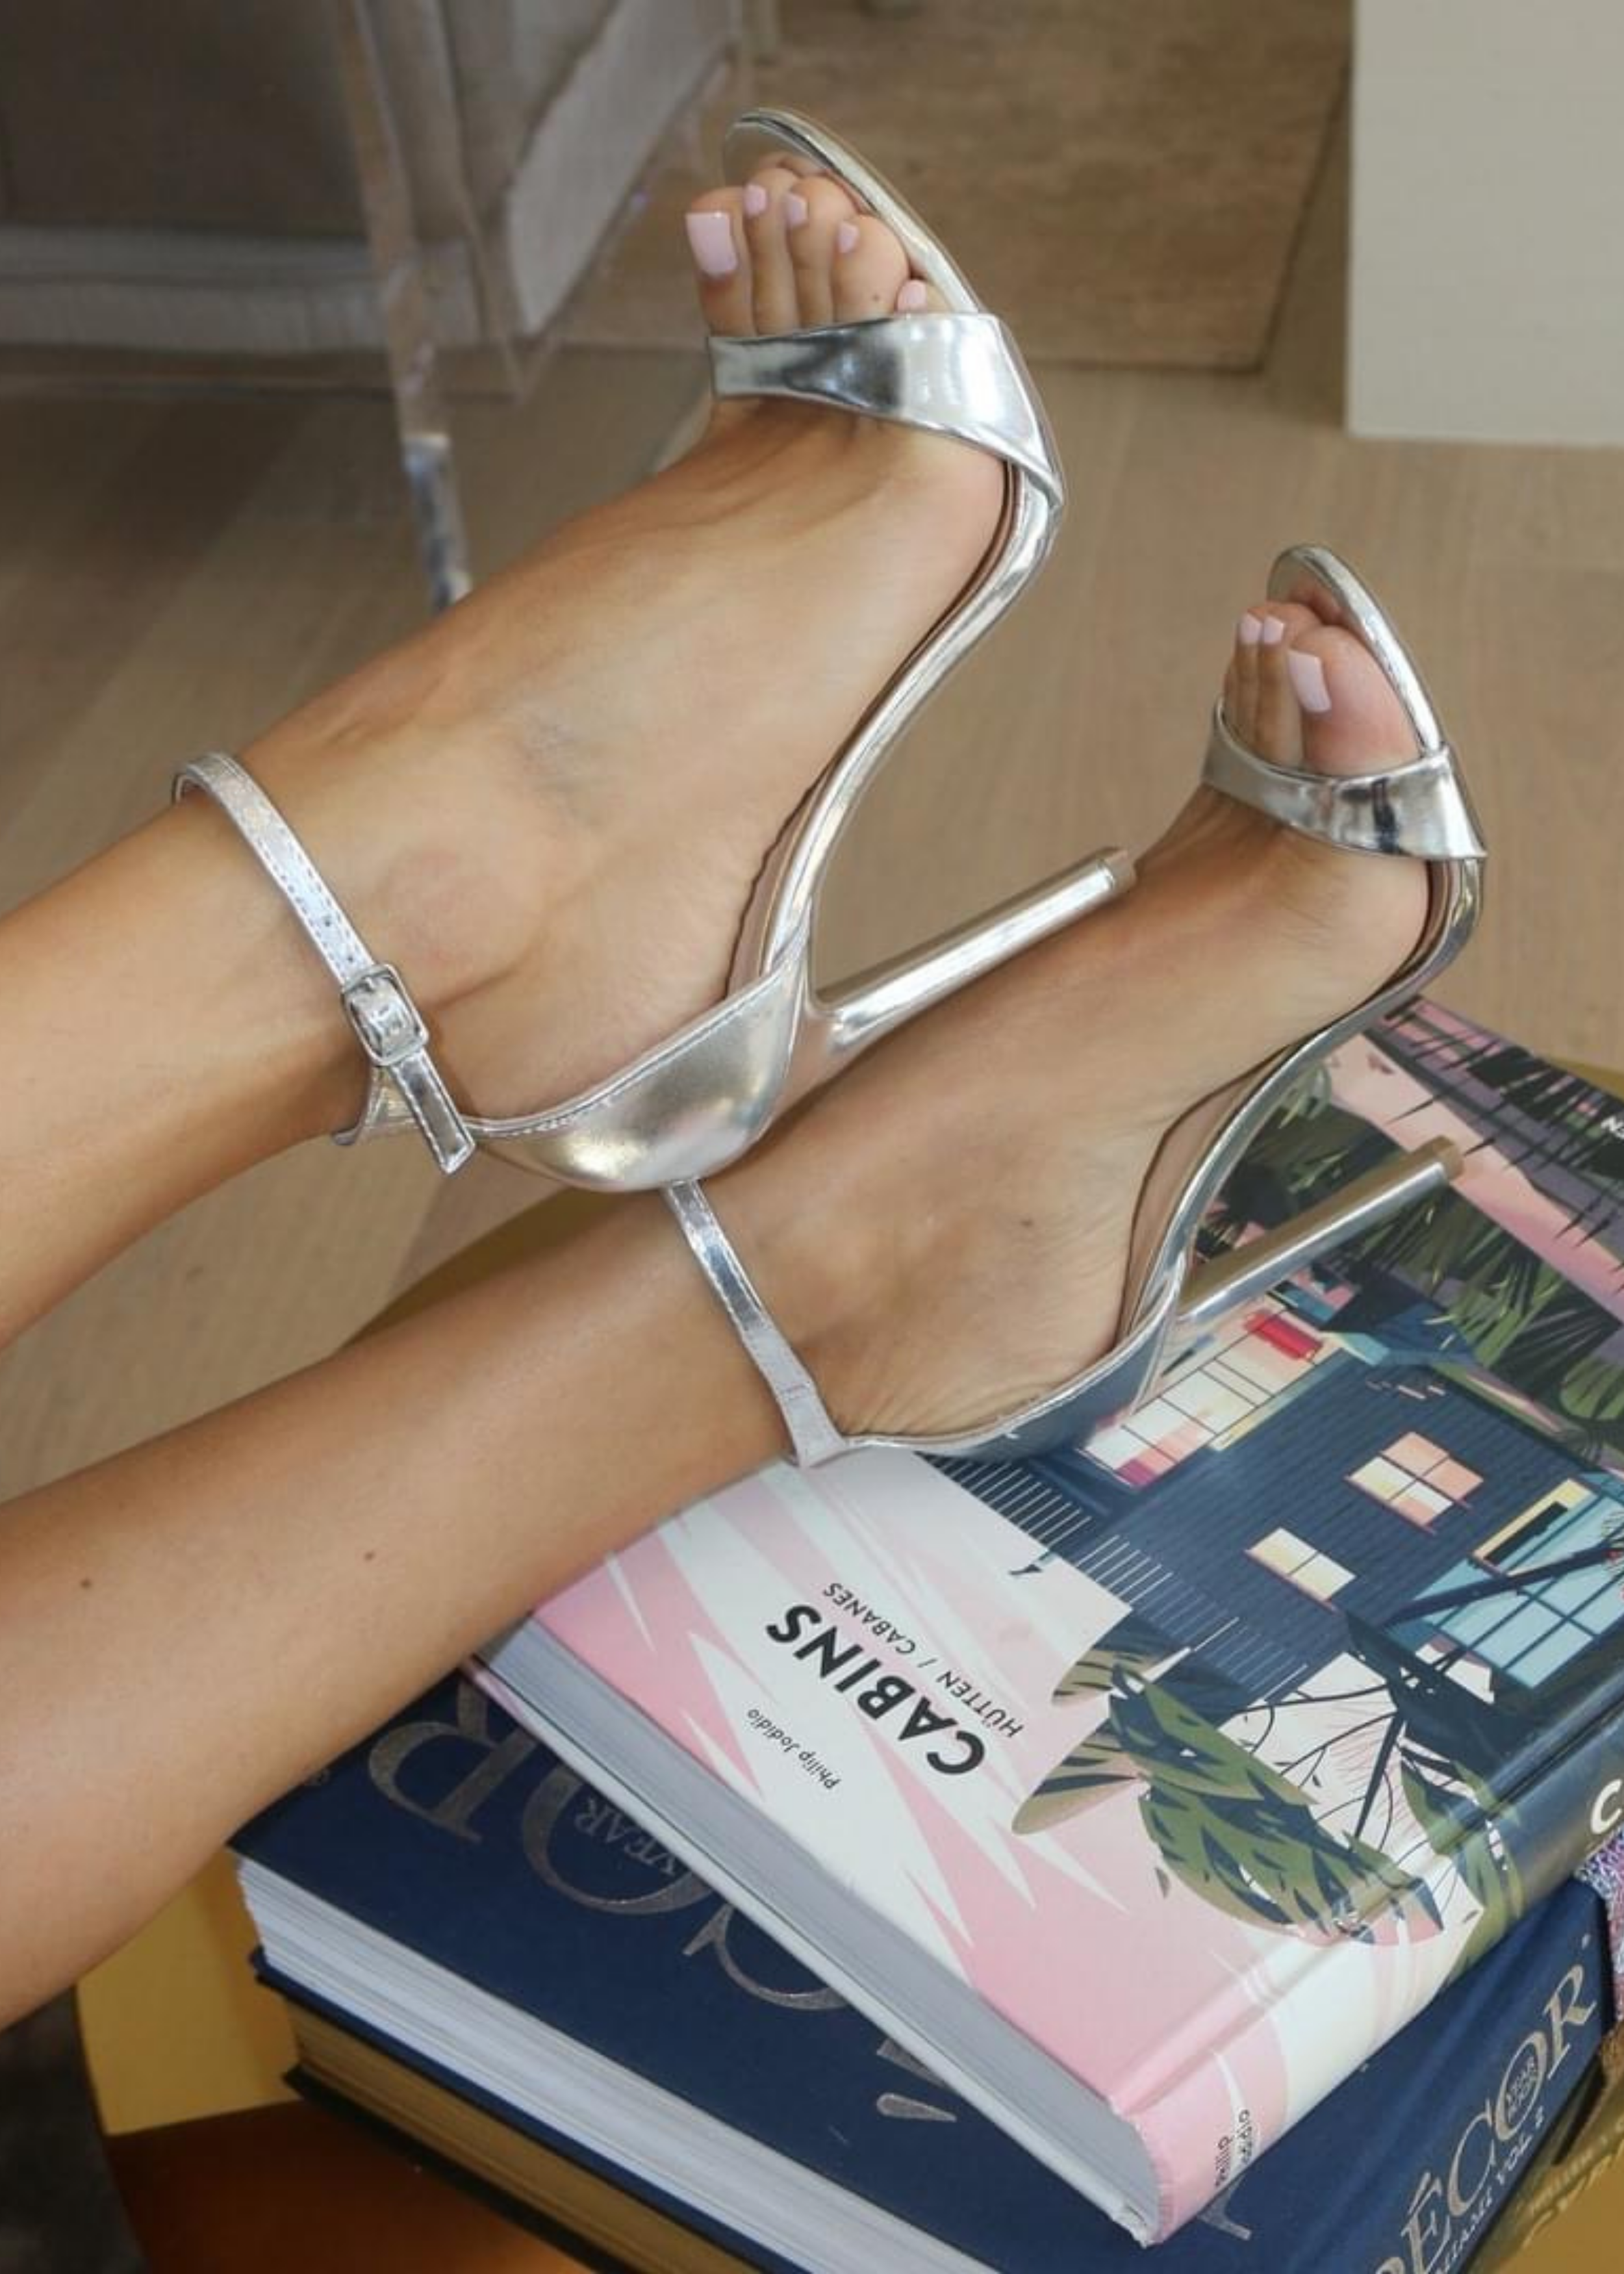 silver heels with strap